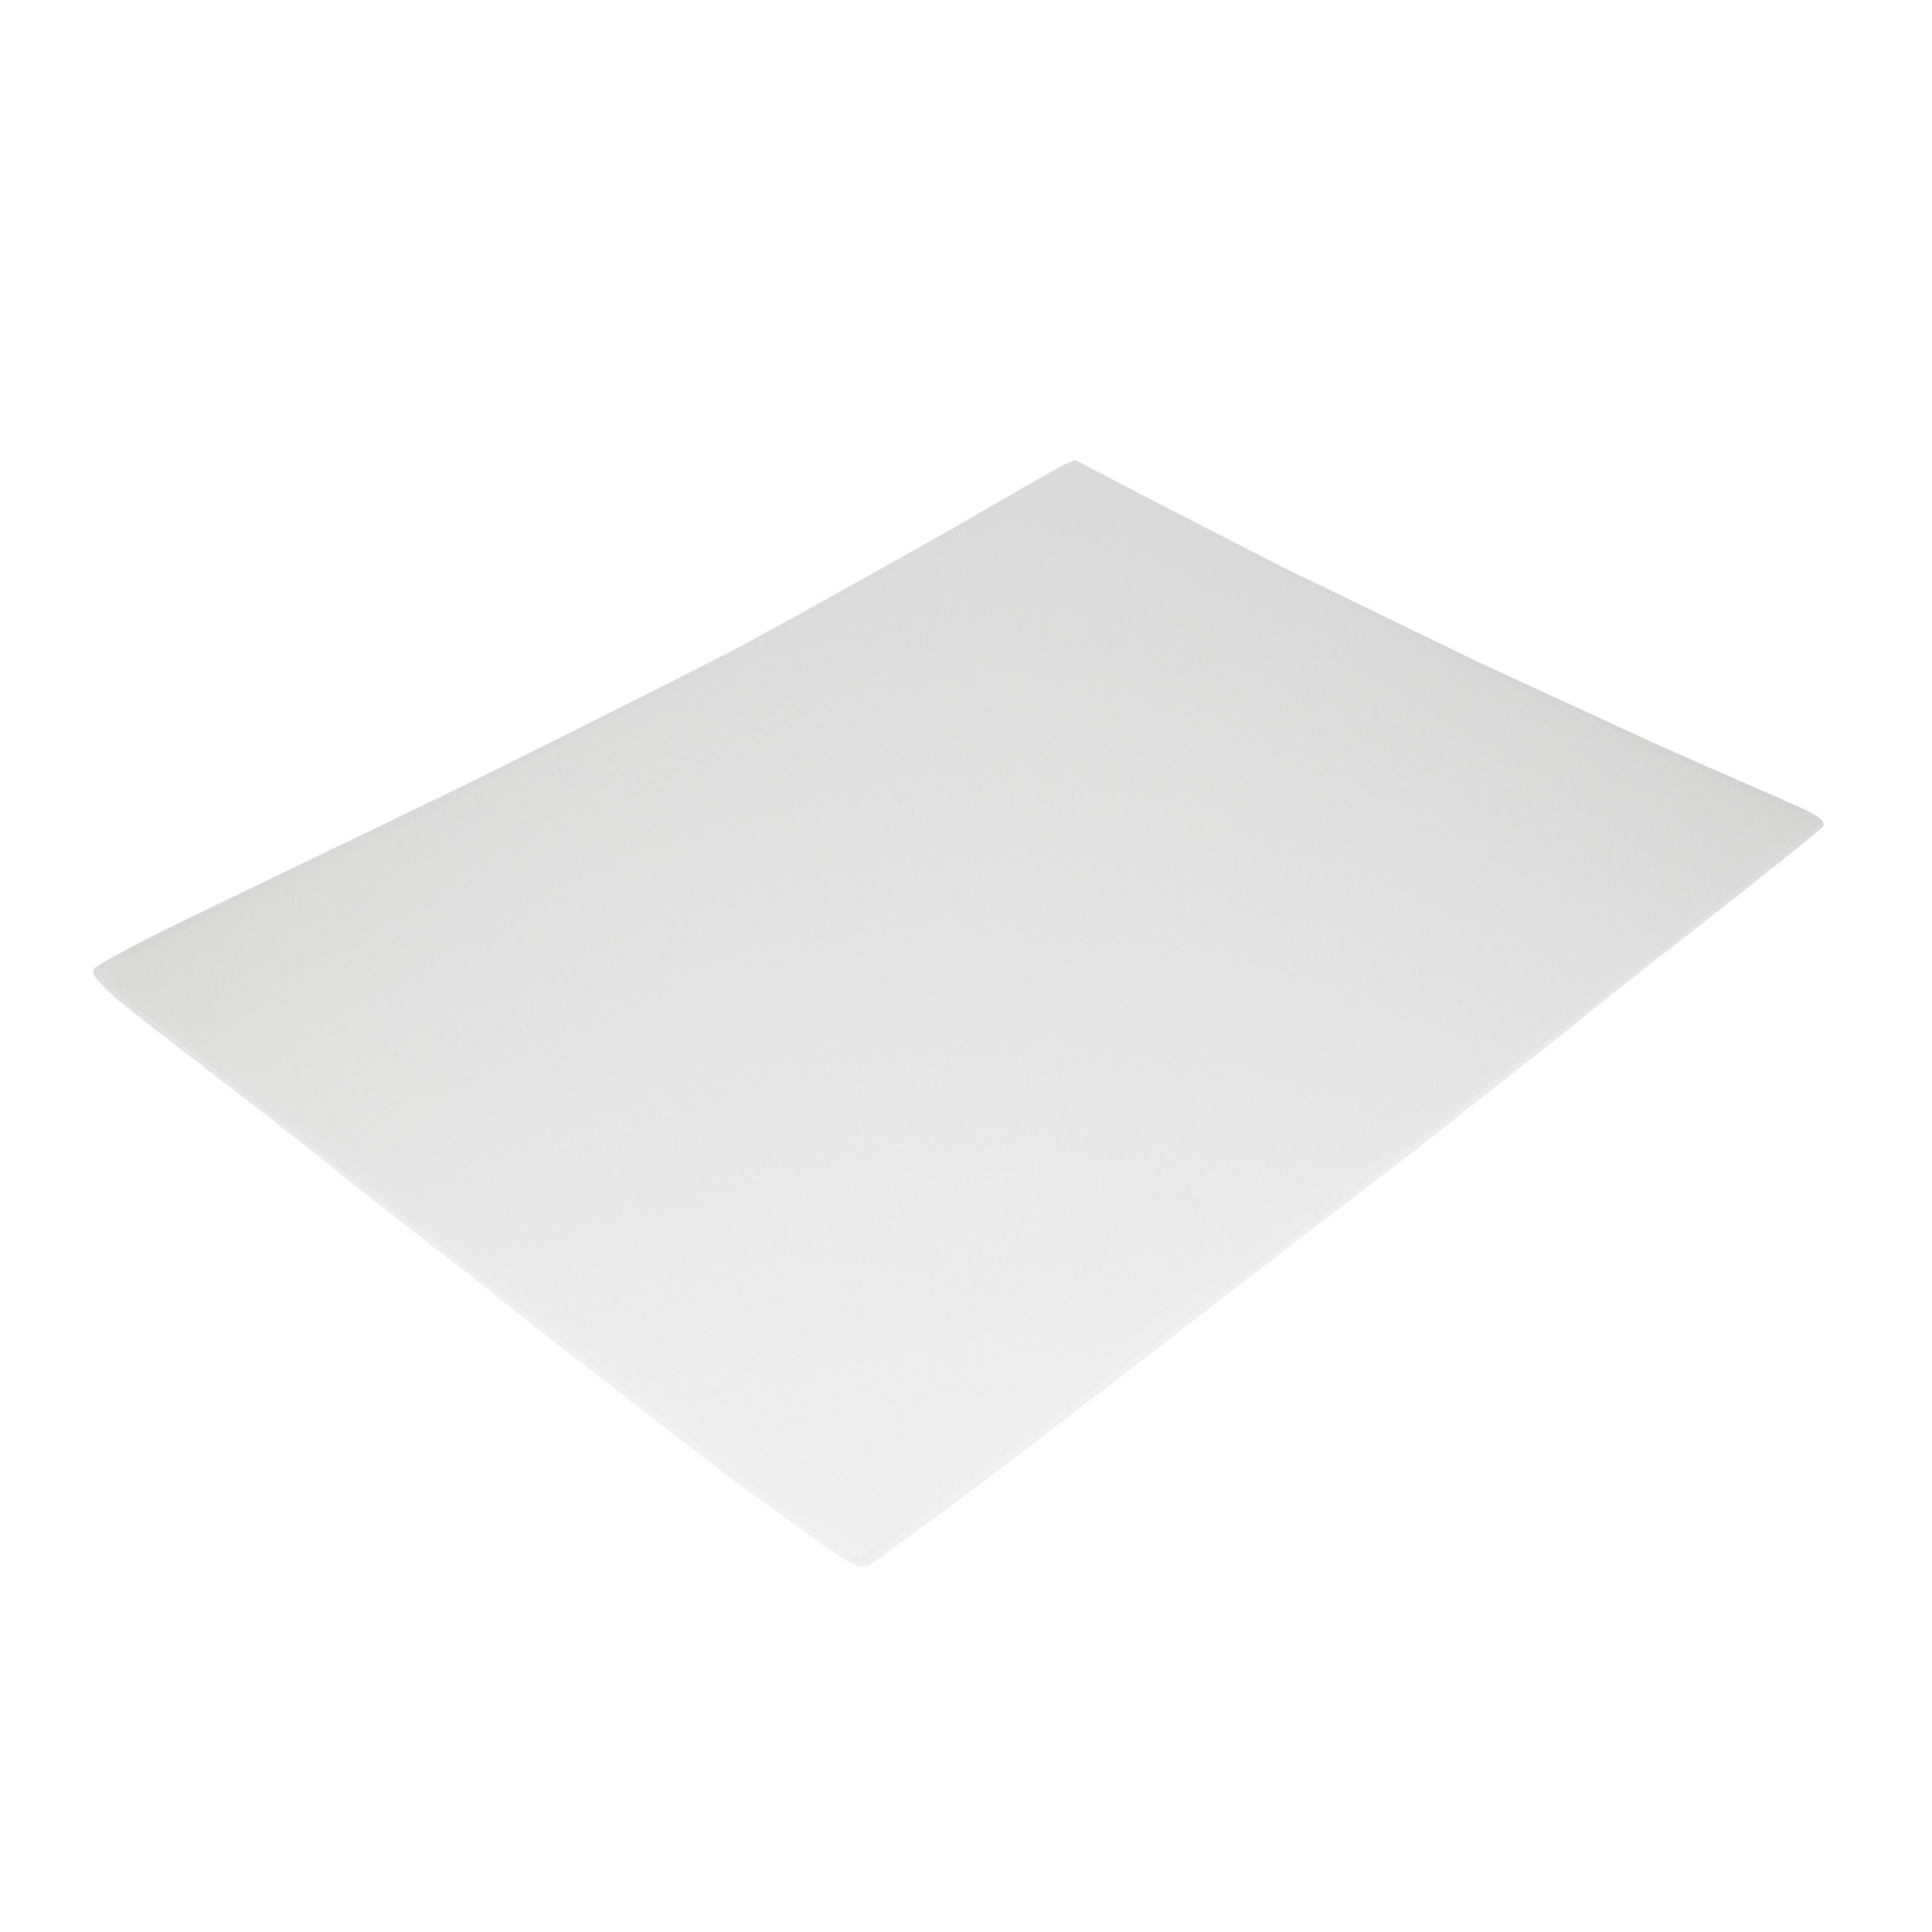 Diall Polystyrene 6mm Insulation board (L)0.8m (W)0.6m, Pack of 8